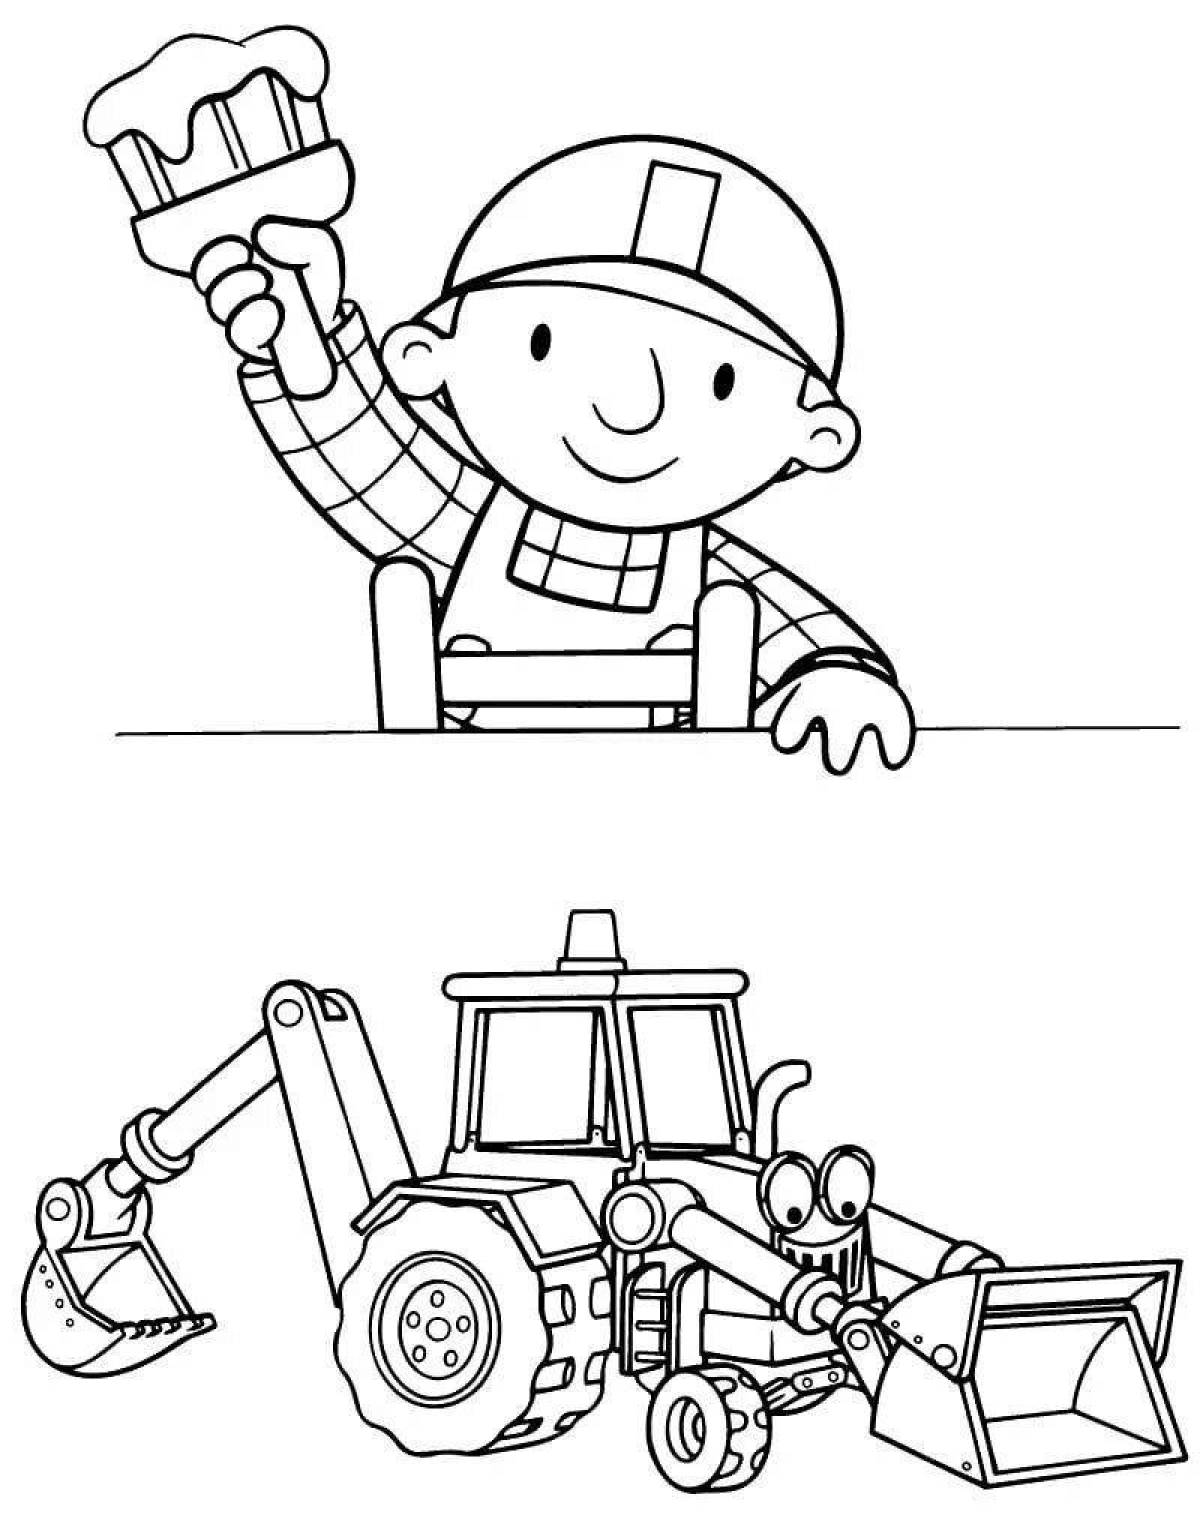 Dedicated builder coloring page